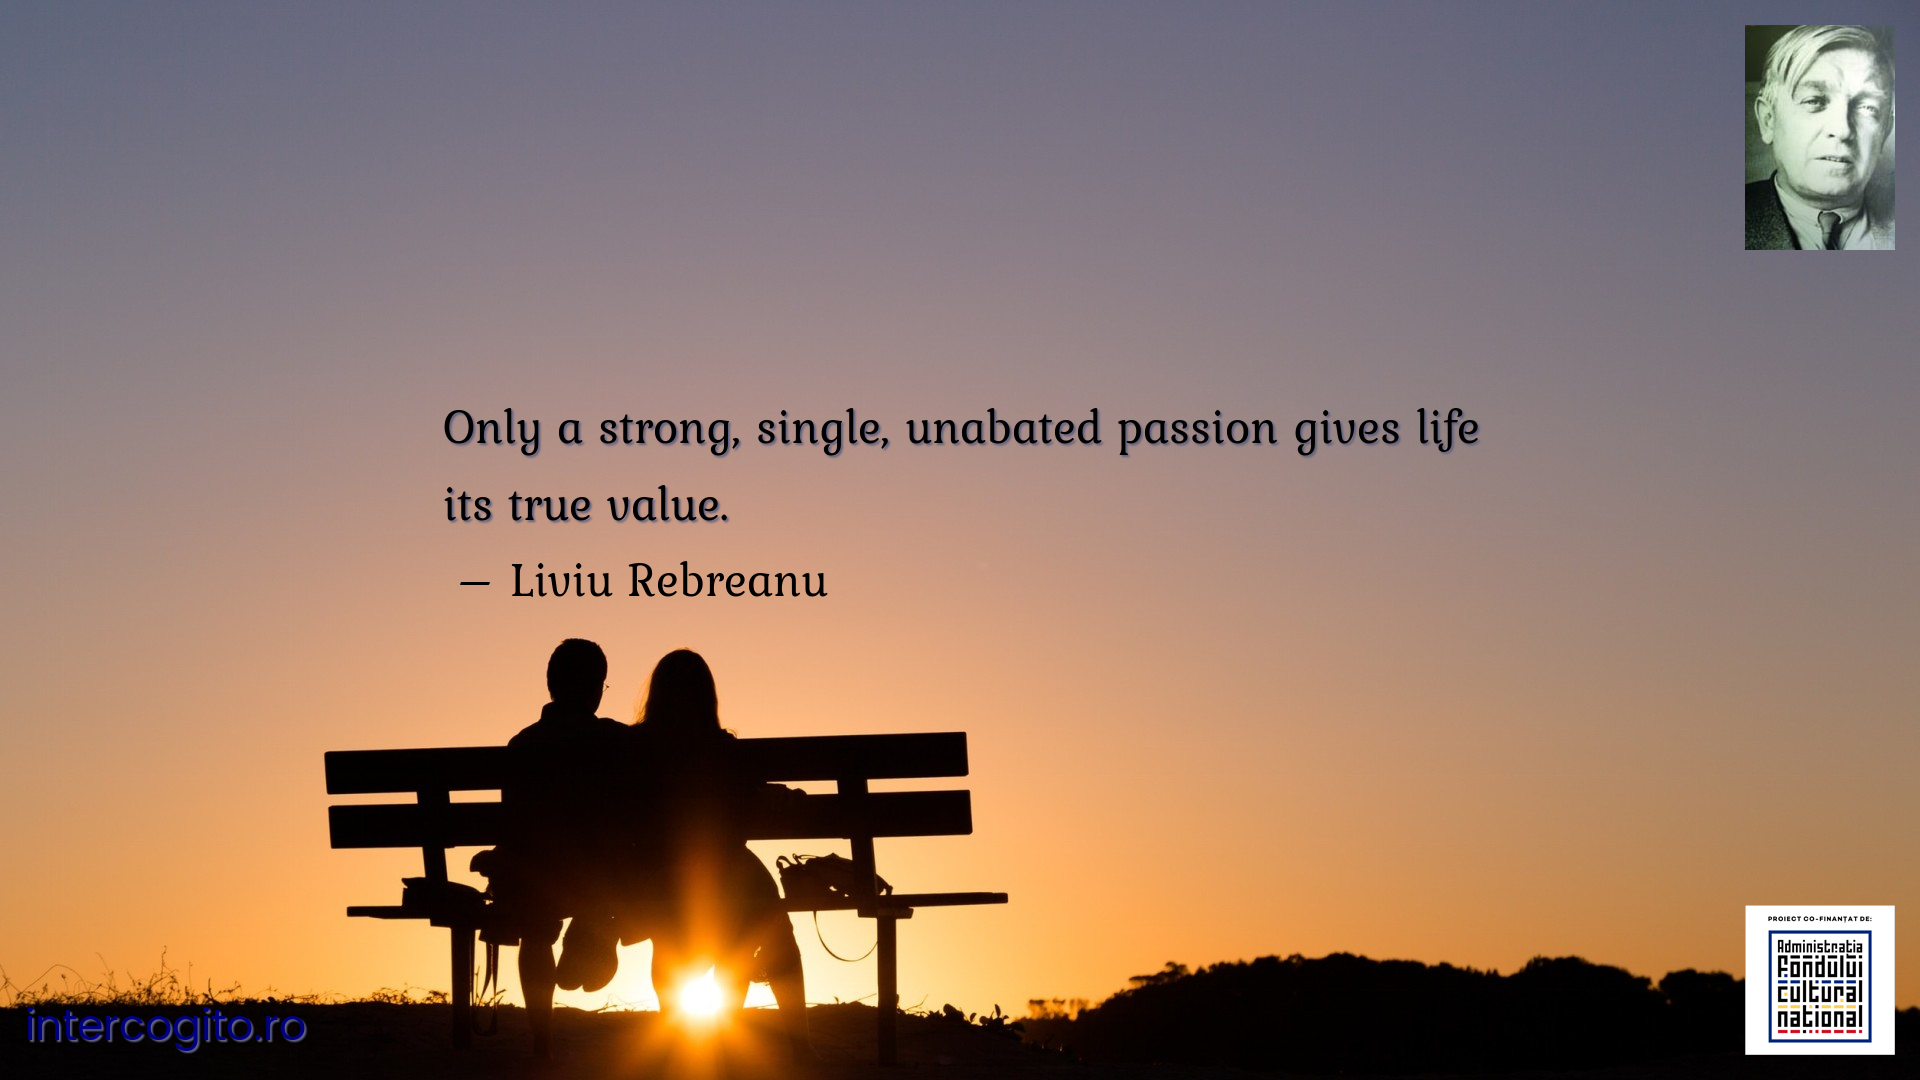 Only a strong, single, unabated passion gives life its true value.